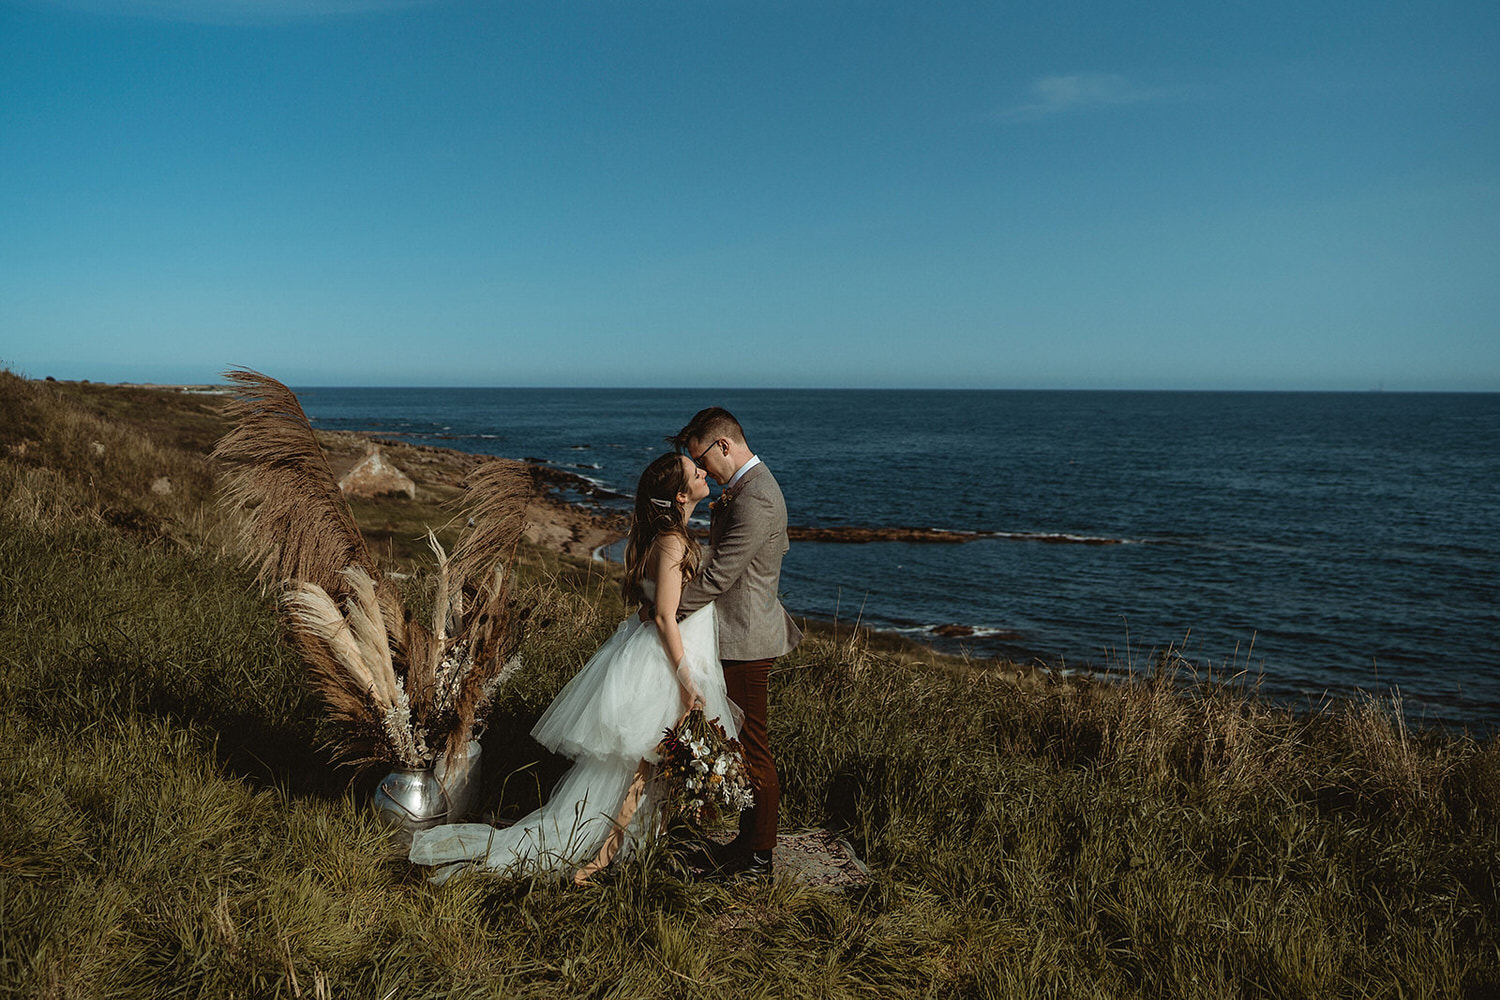 Ceremony set up for clifftop seaside elopement in Scotland